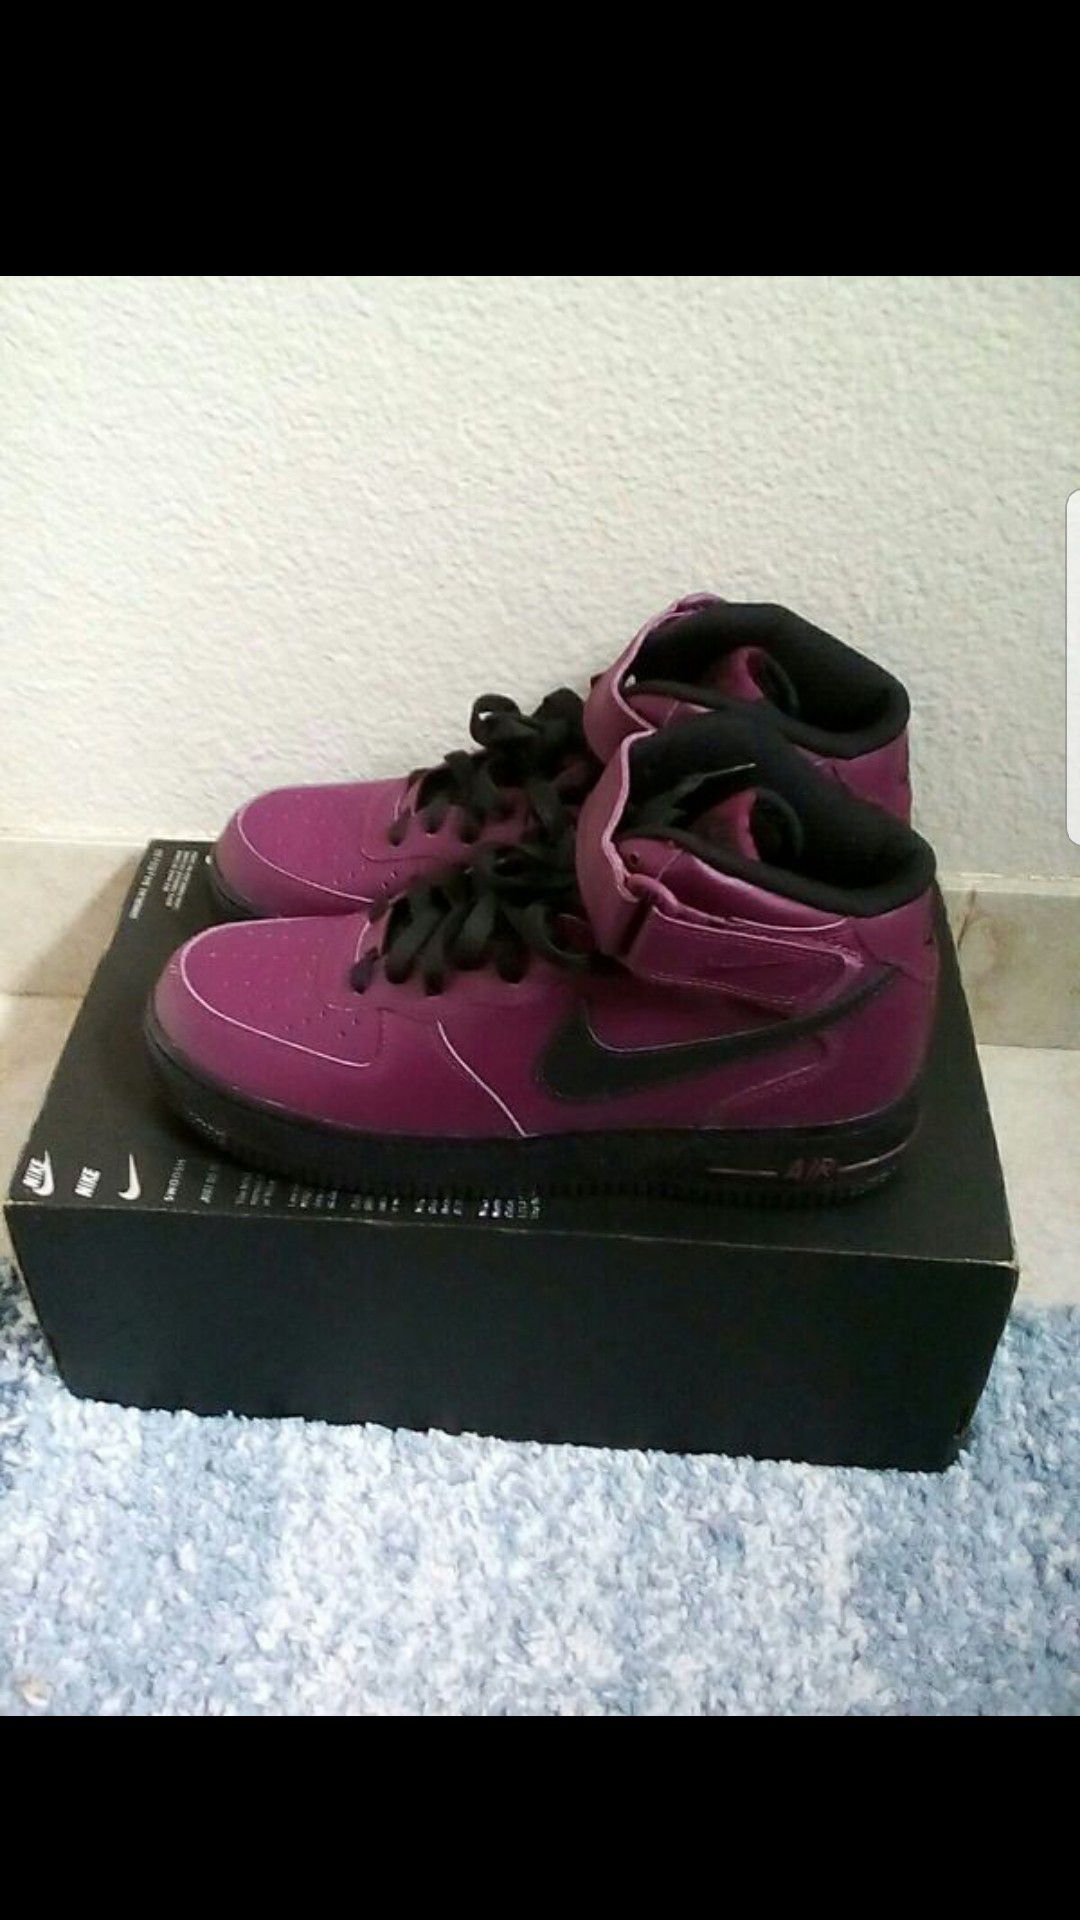 Nike Air Force 1 Mid purple and black size 8.5 men